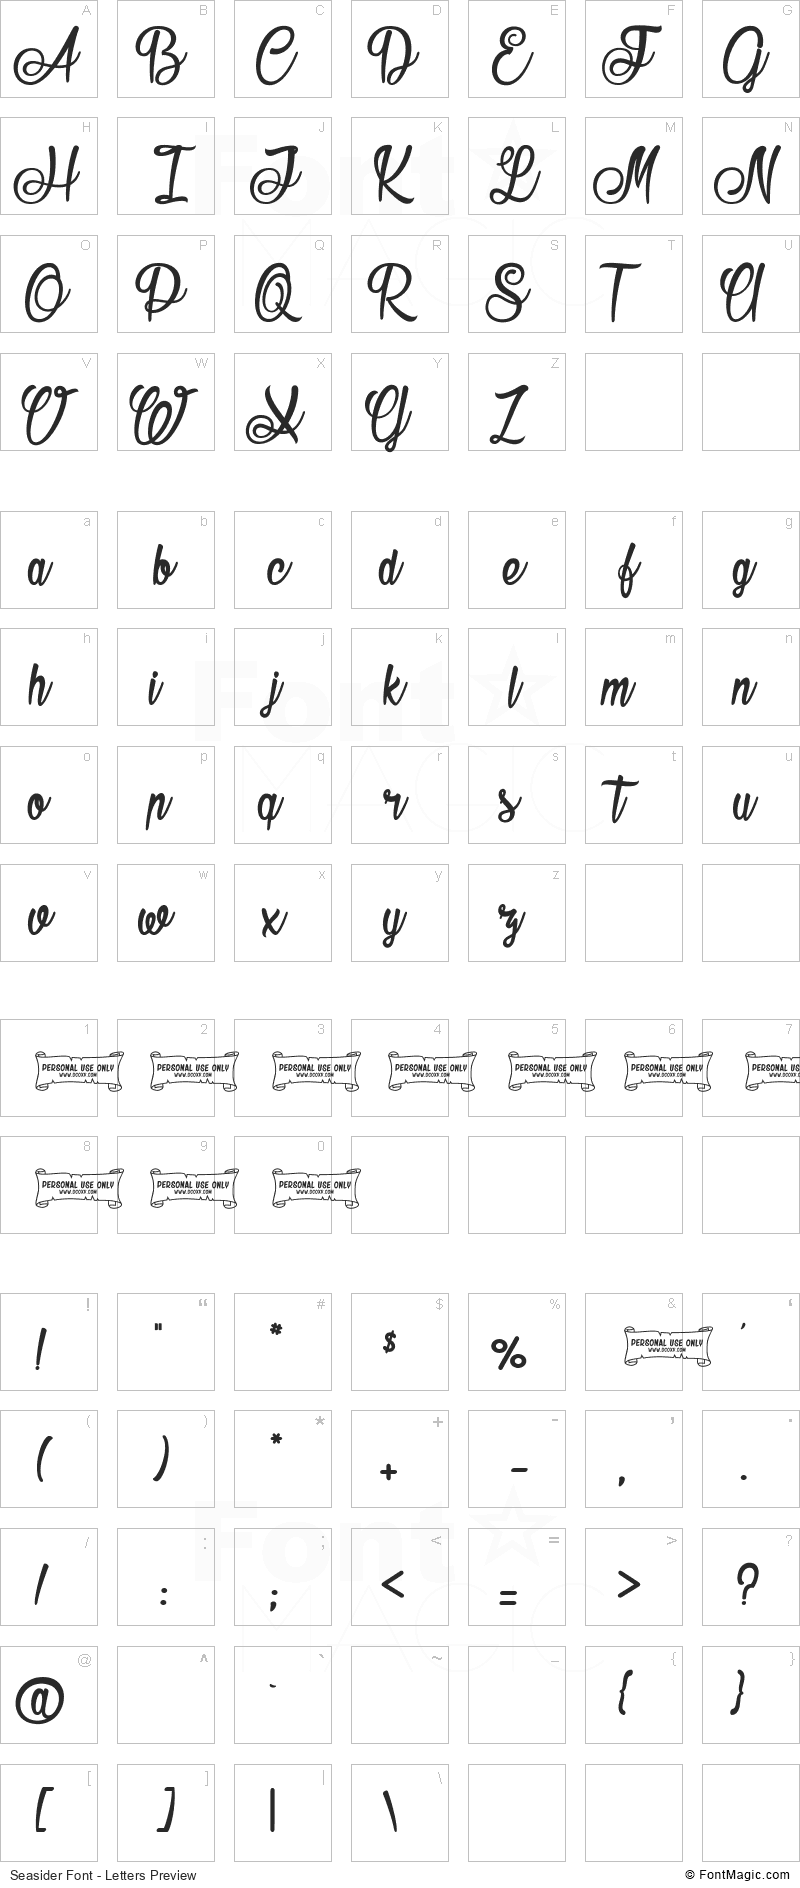 Seasider Font - All Latters Preview Chart